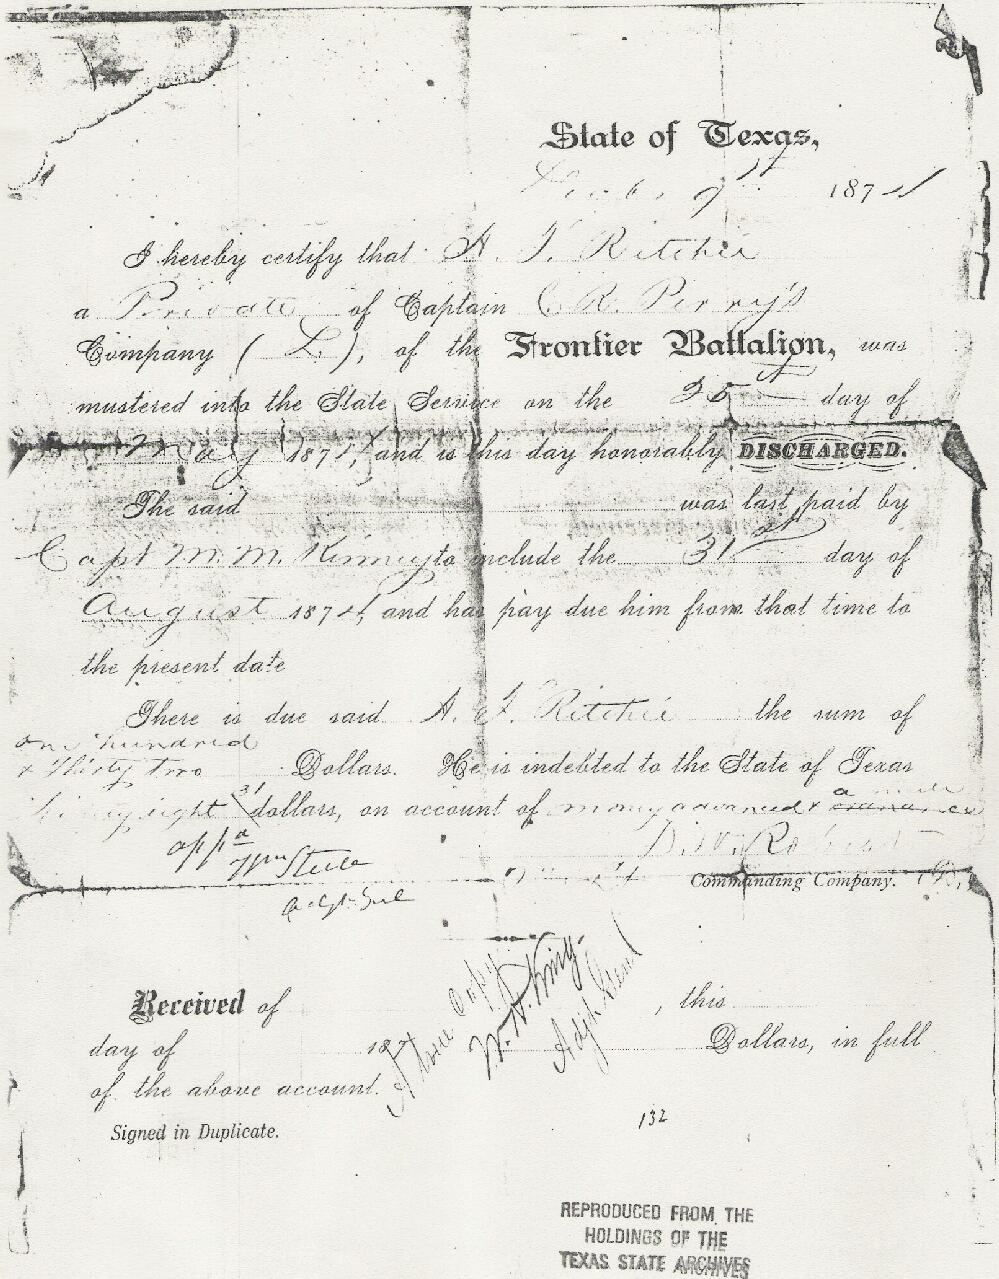 More discharge papers--A. T. Ritchie